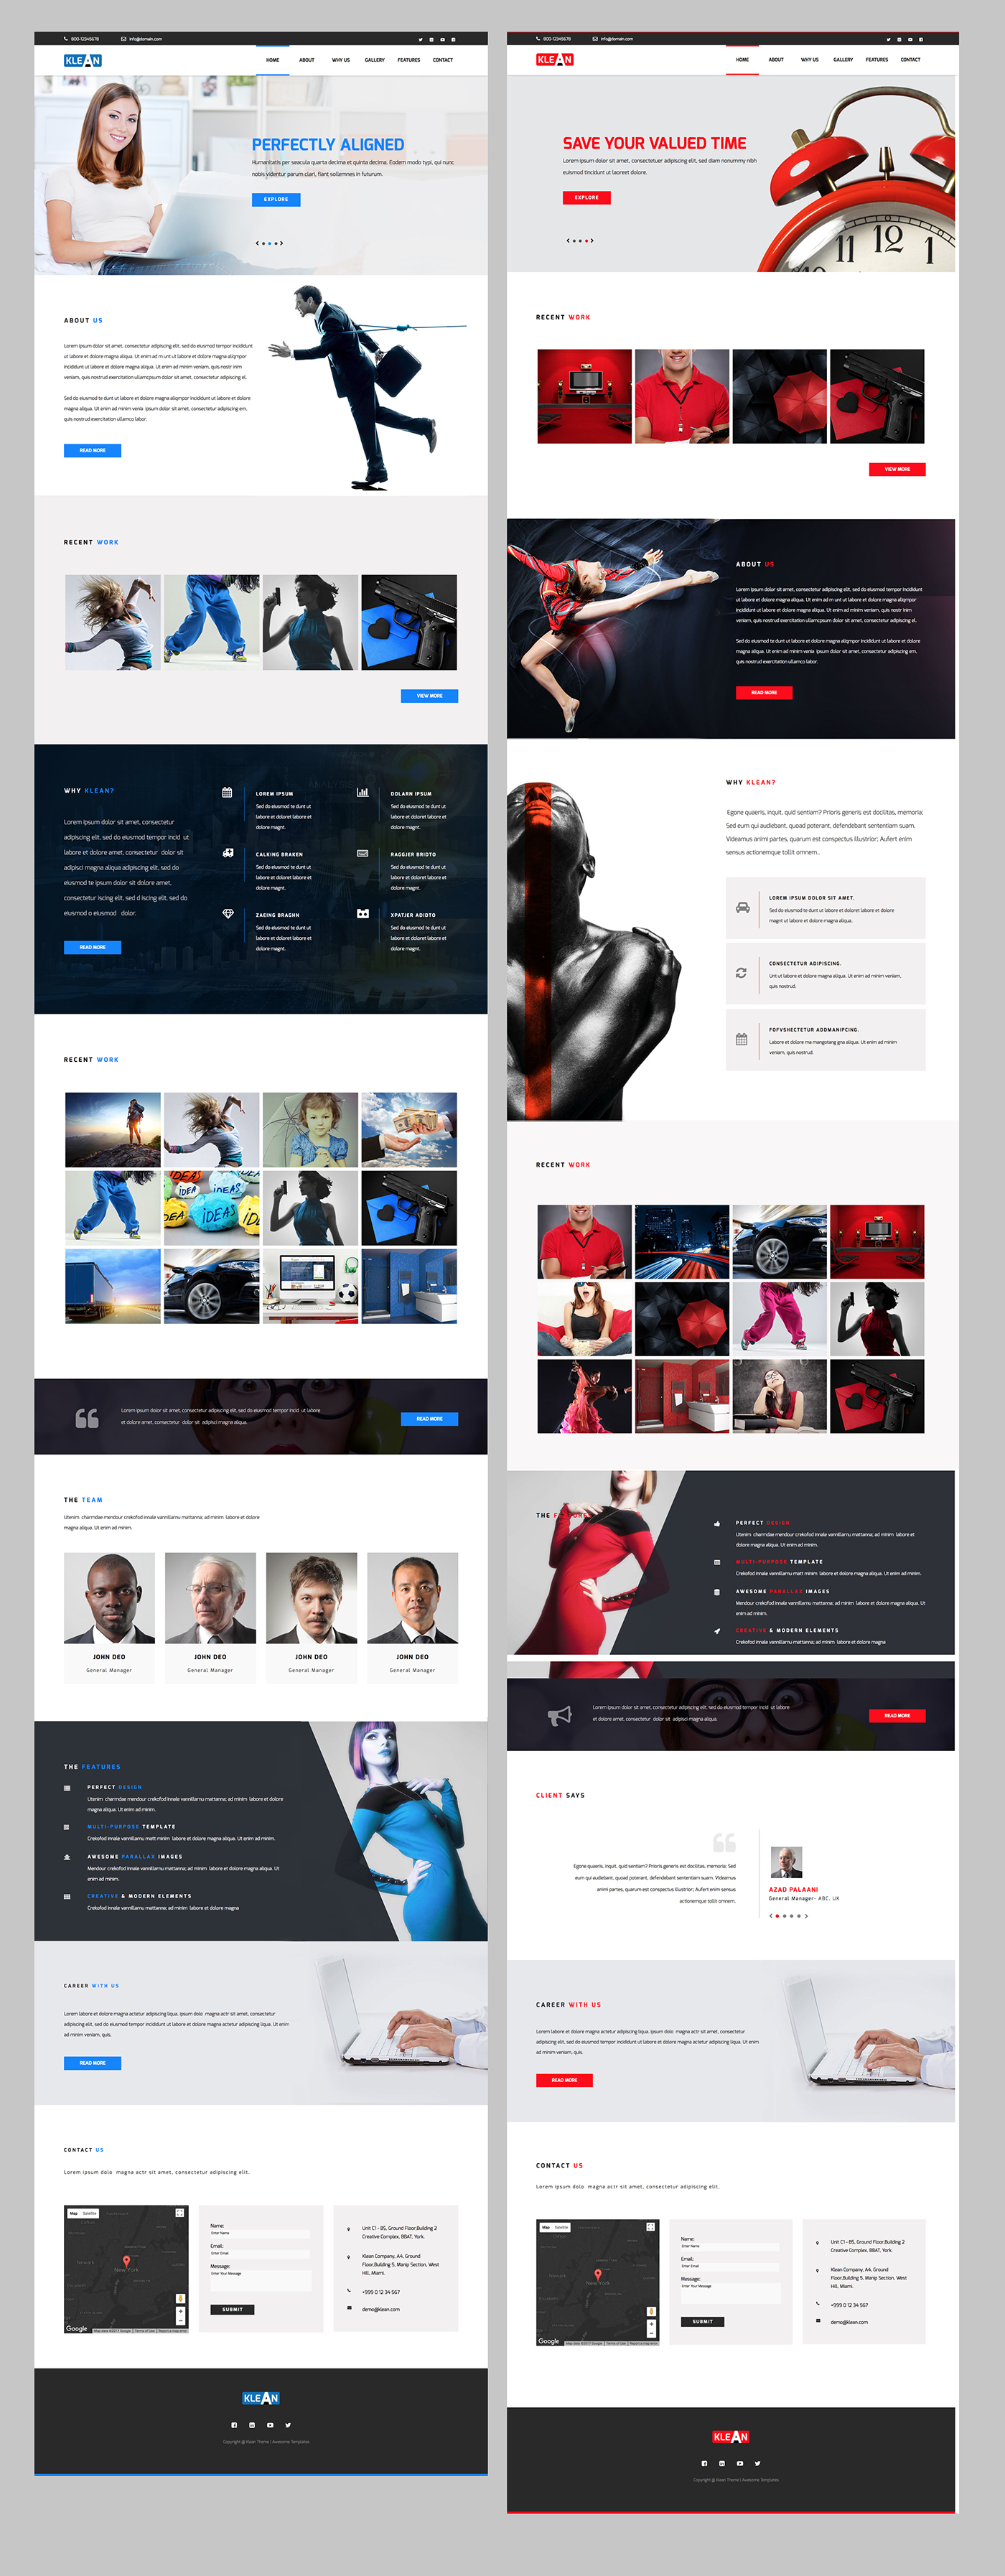 adobe muse themeforest muse template website template creative template  creative muse template premium template